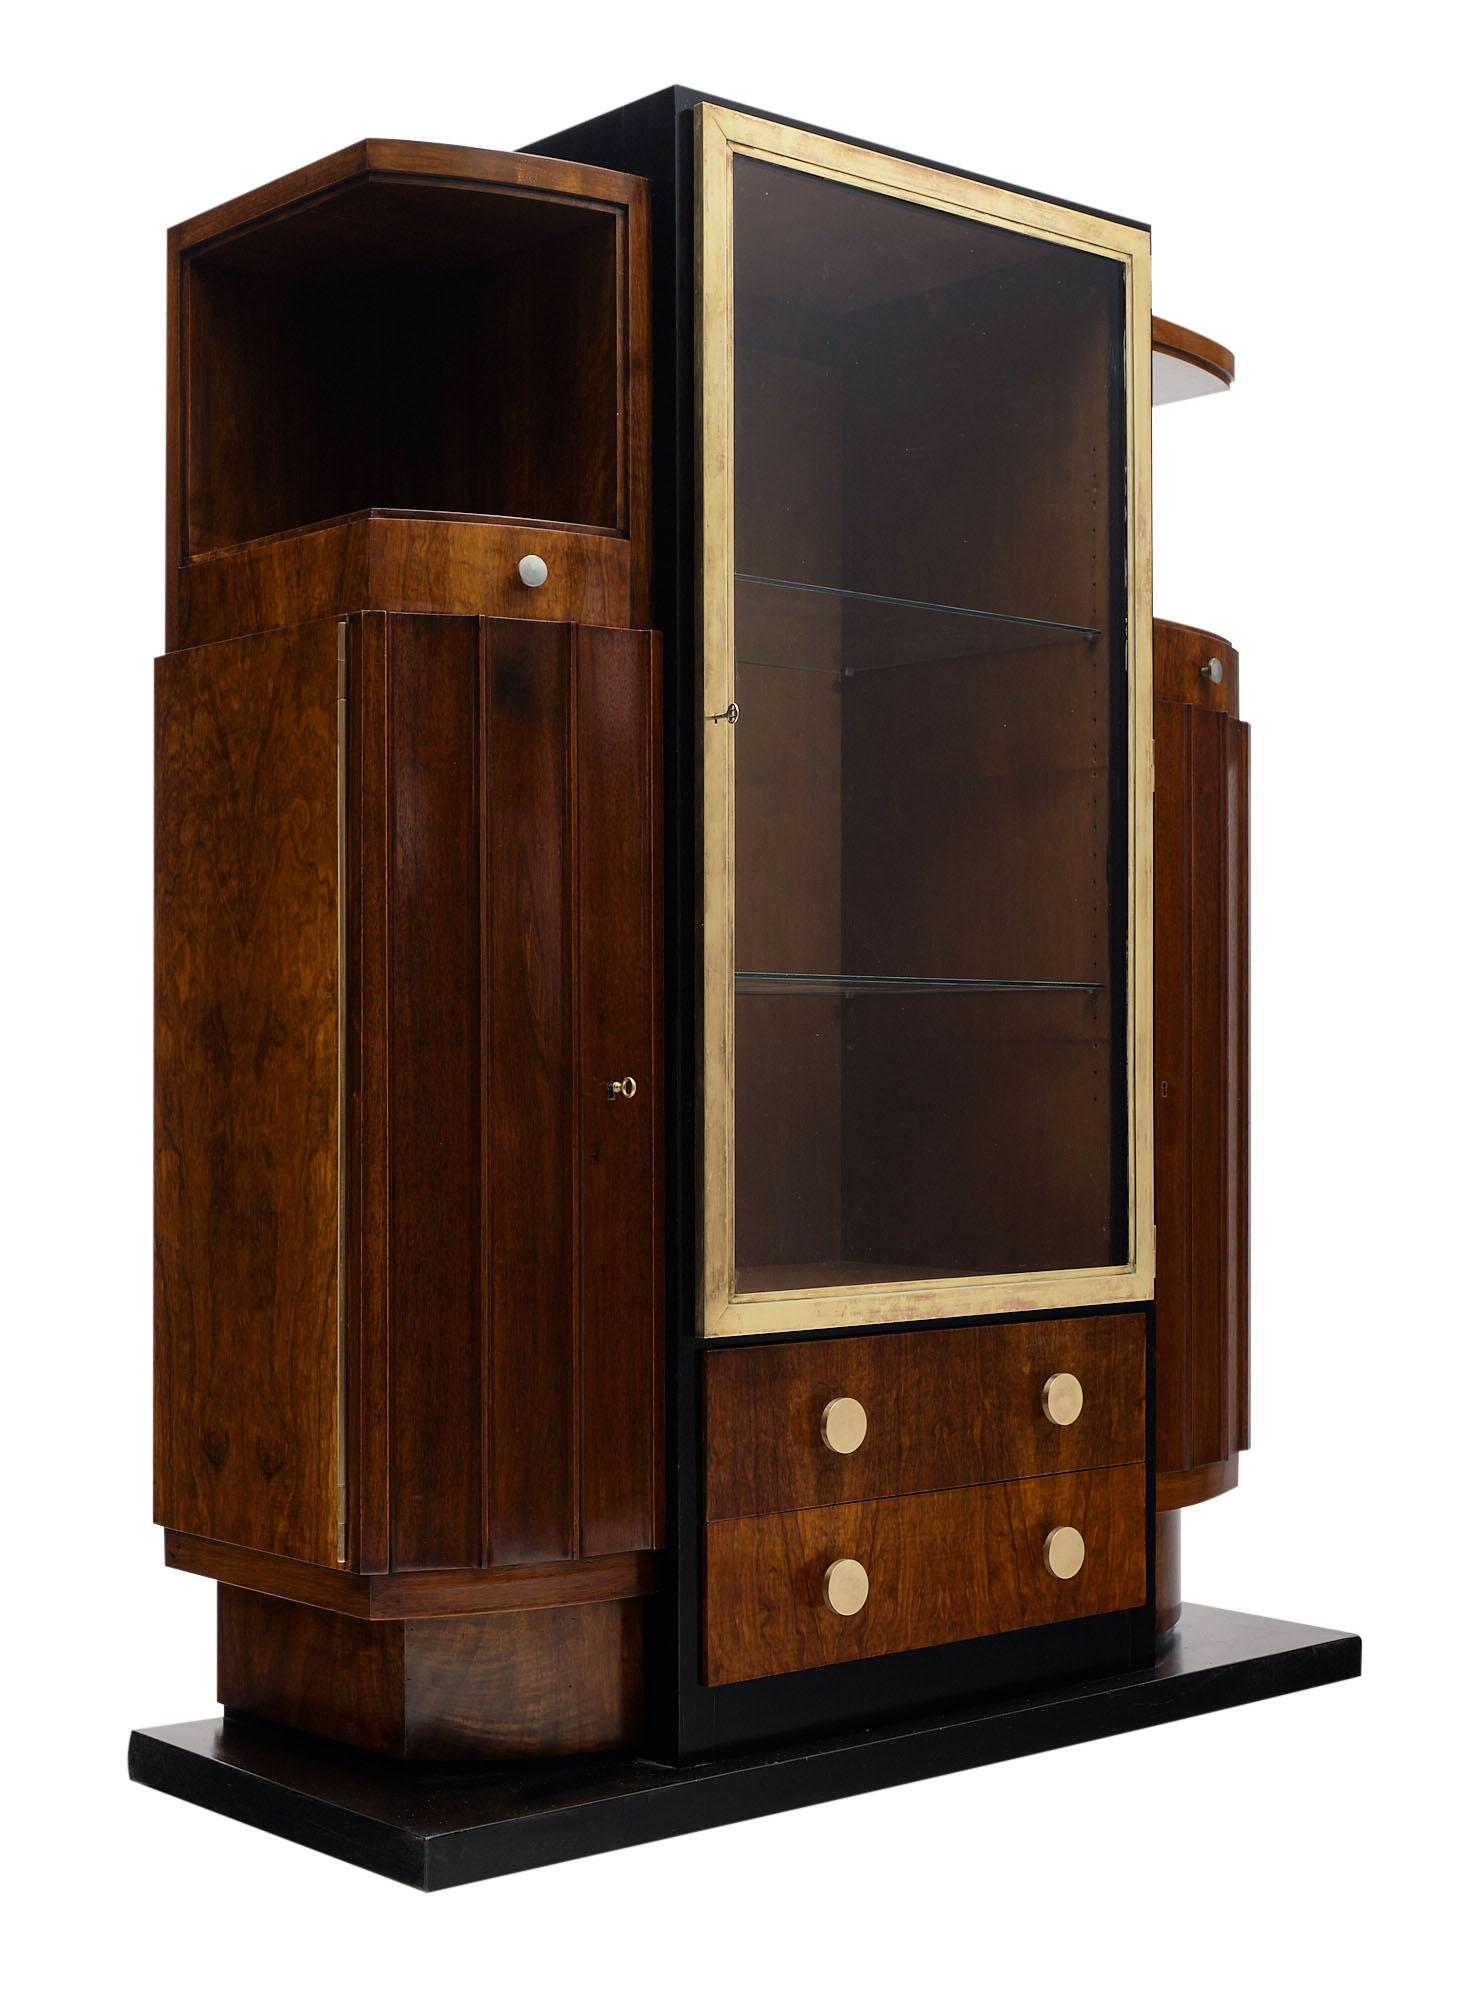 Cabinet or bar from France. This Art Deco period piece sits on an ebonized base and is made of mahogany finished in a lustrous French polish. The piece has two dovetailed drawers and side doors that open up to various storage spaces. The mid section